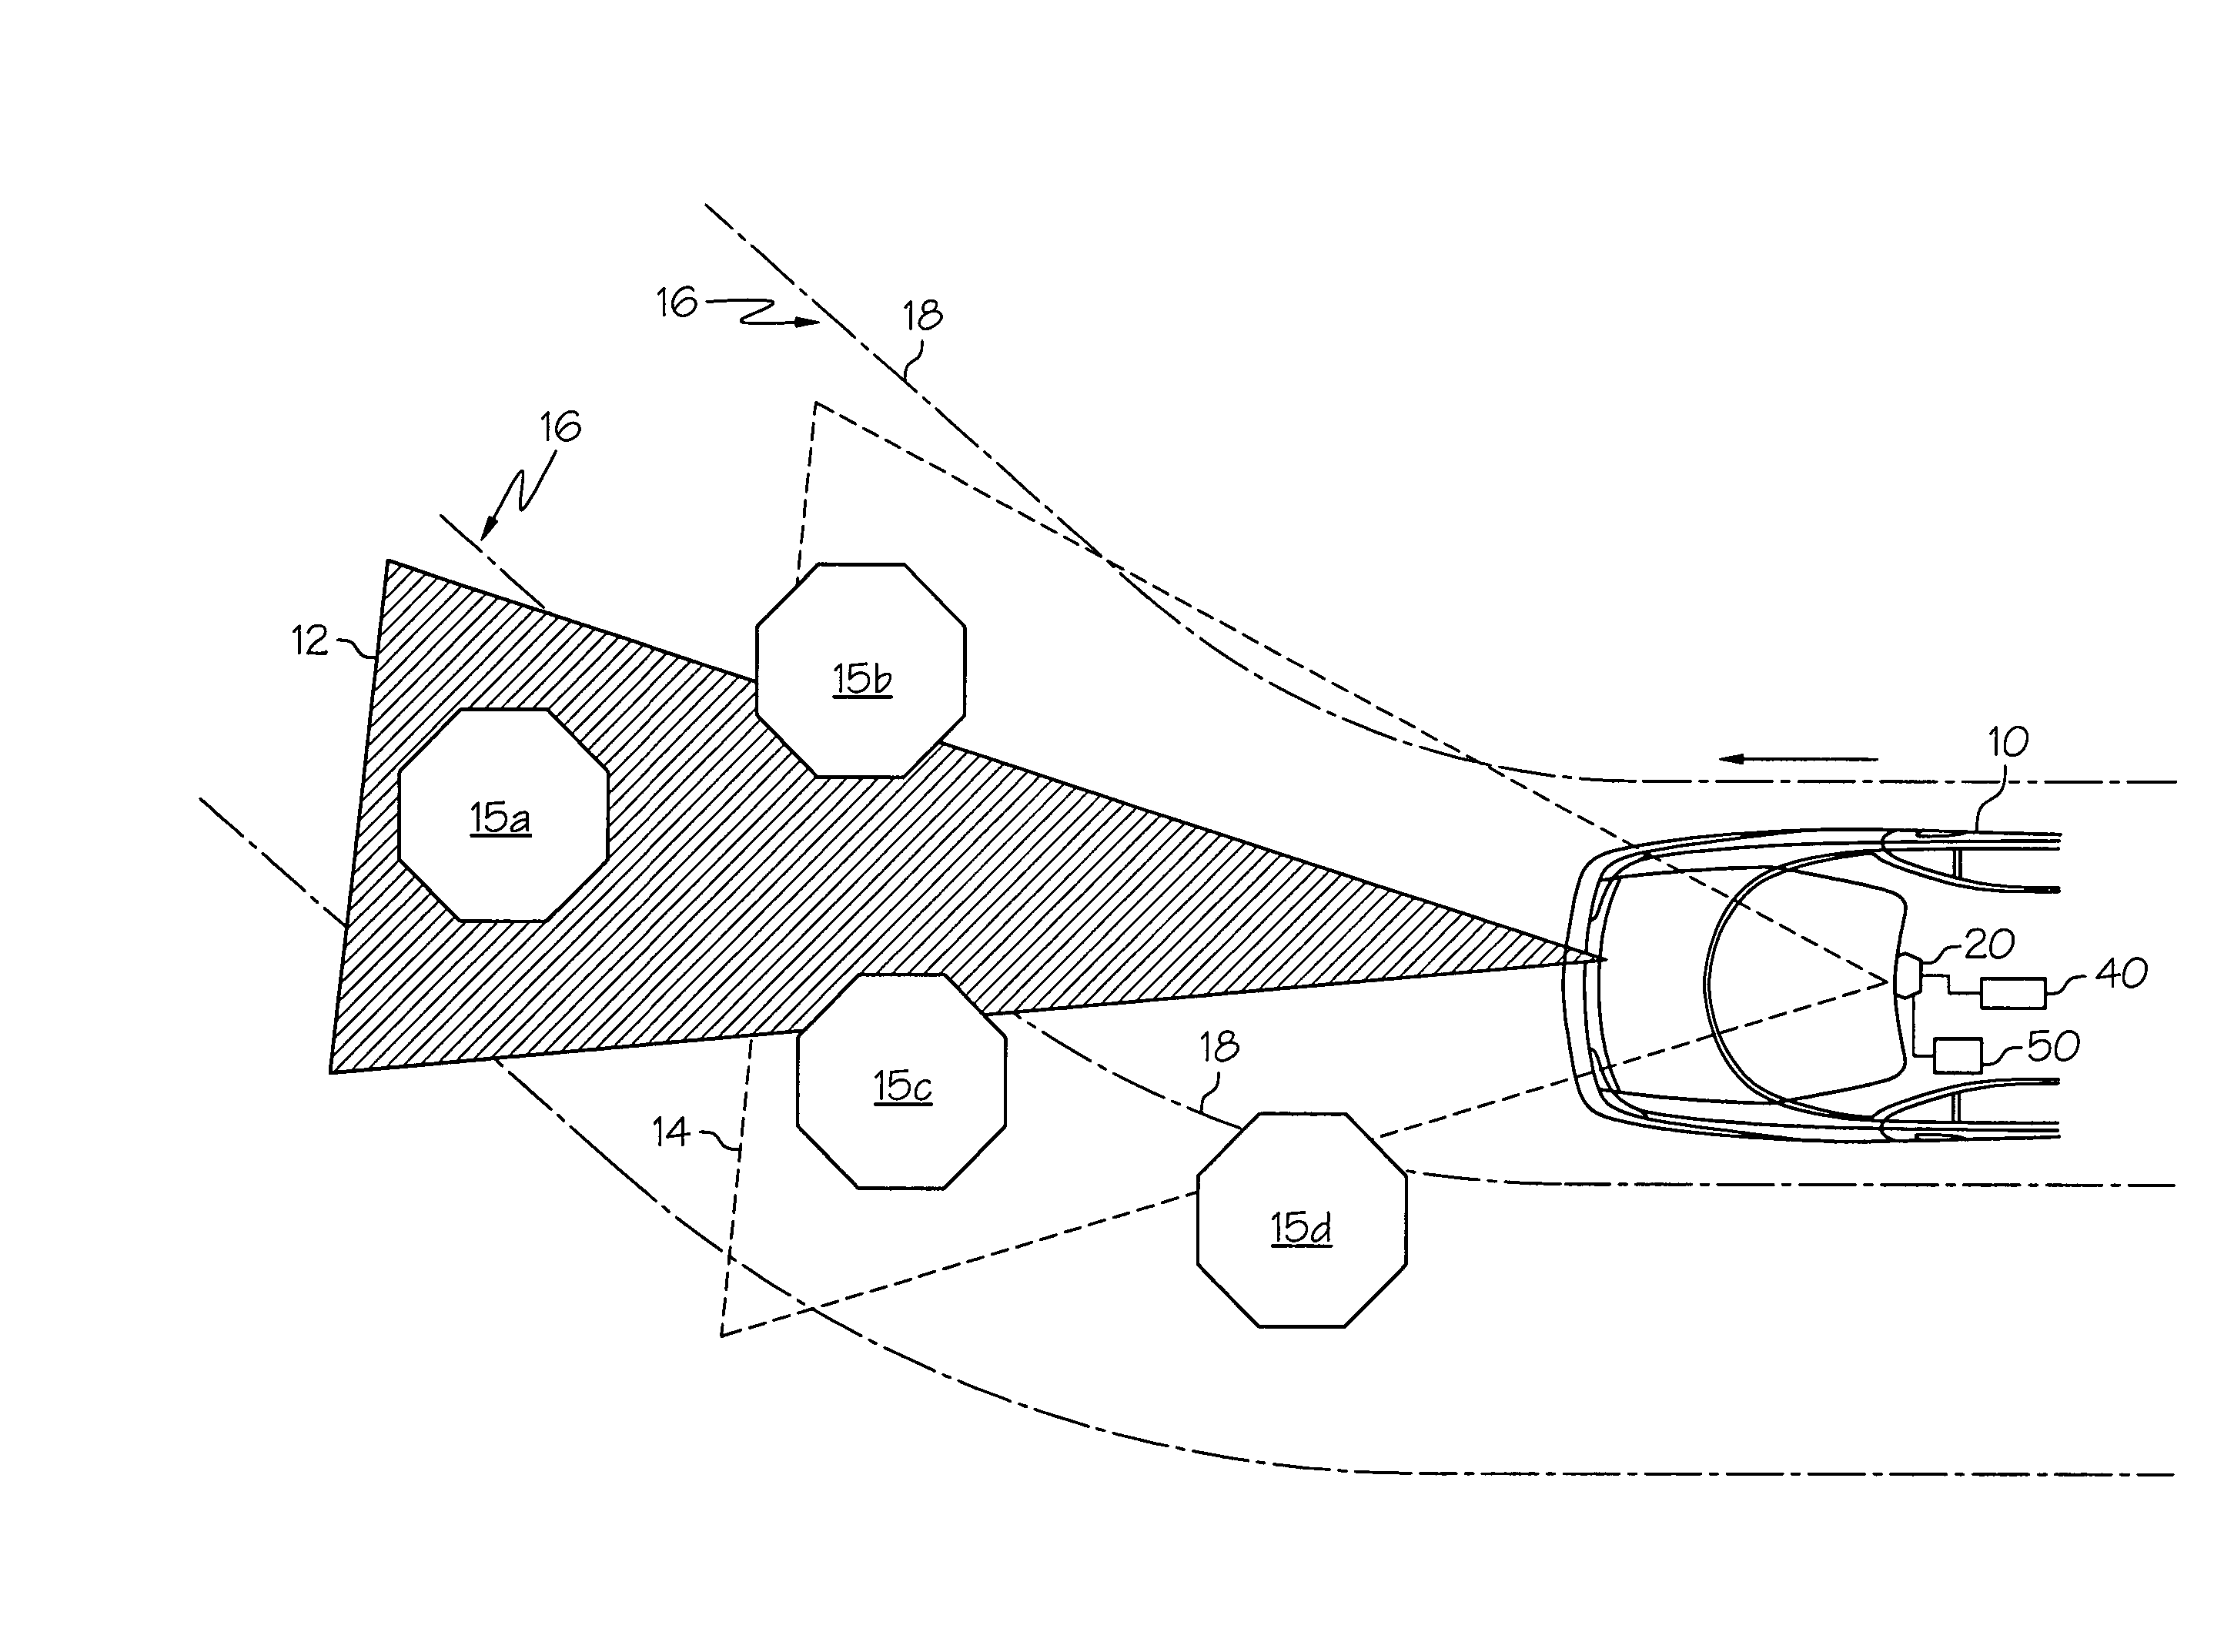 Enhanced adaptive cruise control system with forward vehicle collision mitigation